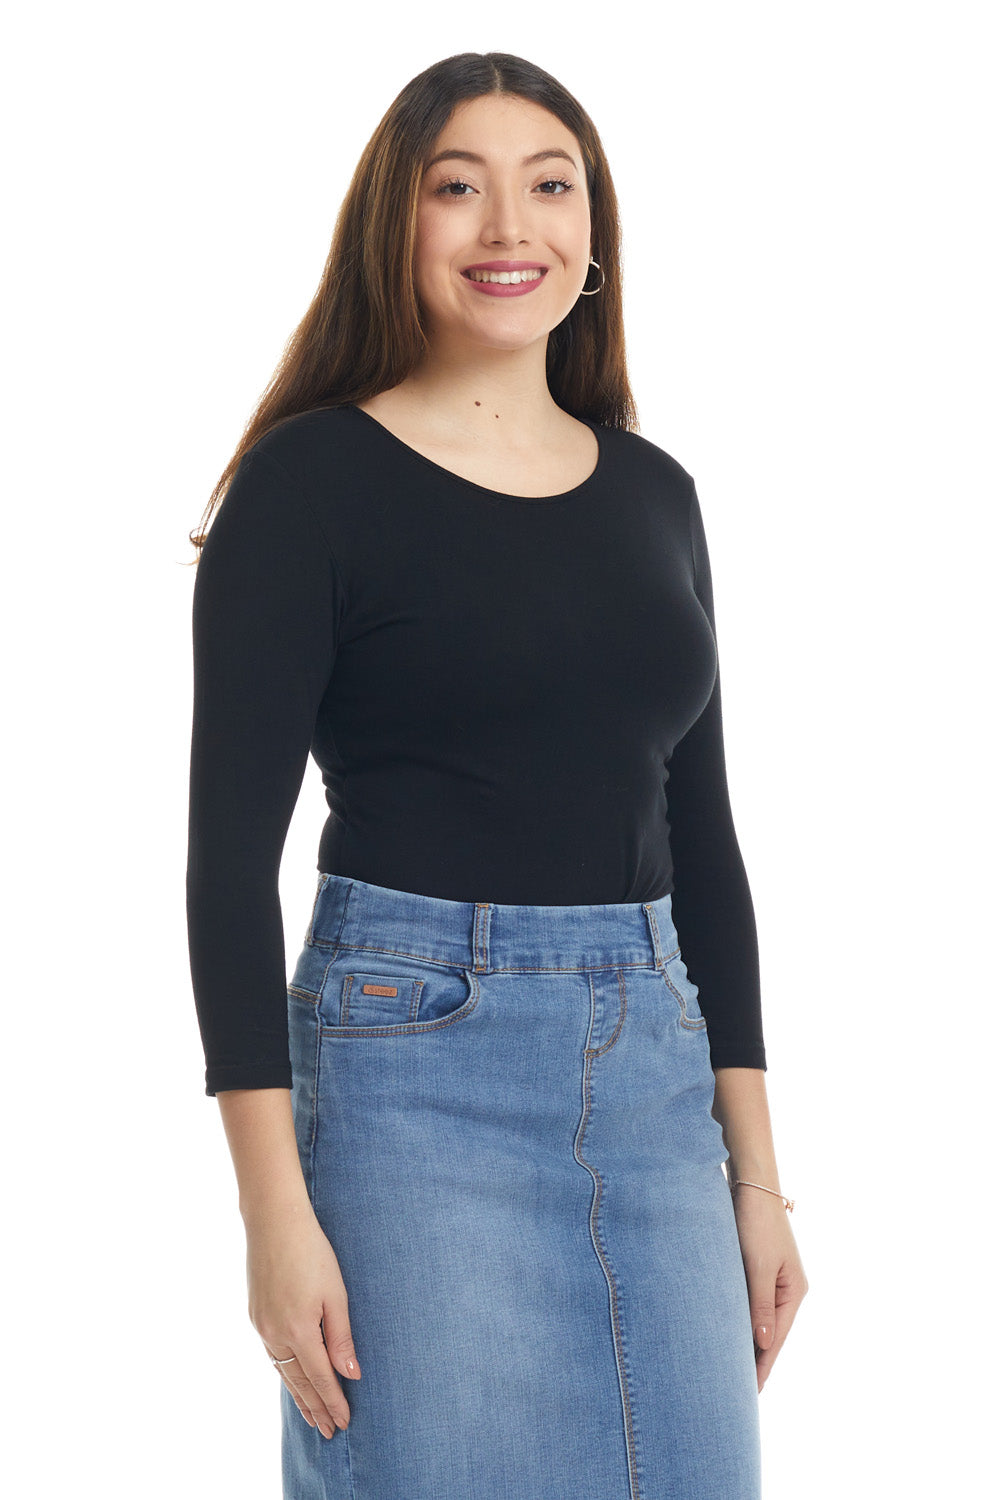 Black 3/4 Sleeve Snug Fit Cotton Boat Neck Layering Shirt for Women